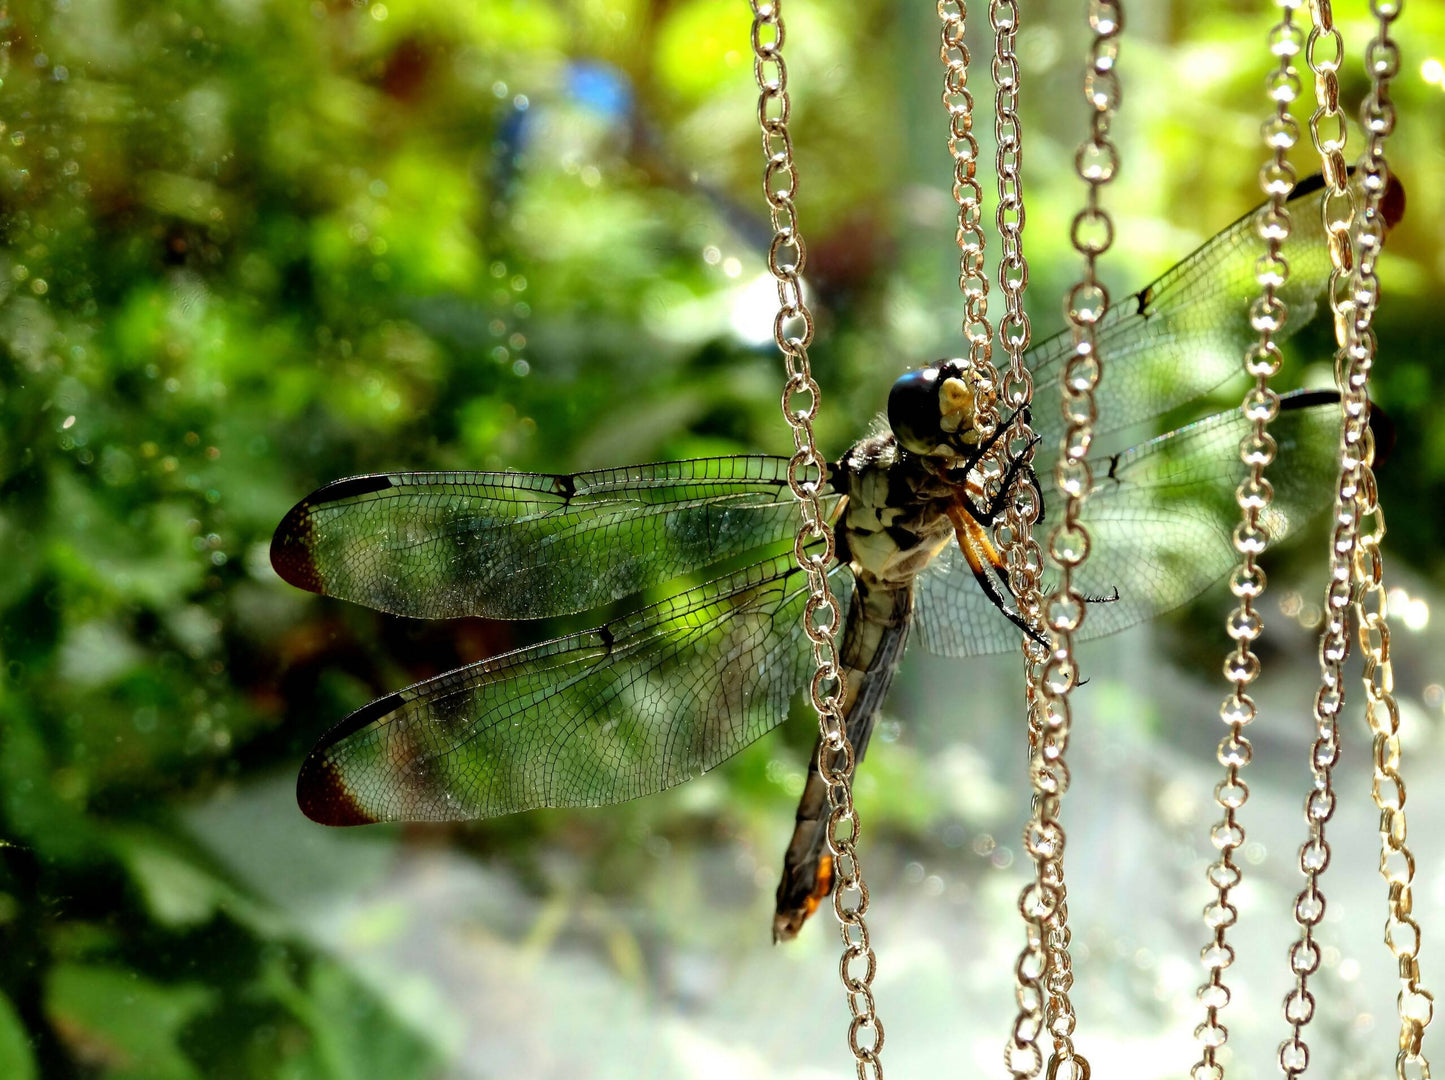 Suspended in Time (Dragonfly) - fine art print (11" x 14) with black acid-free matboard & frame (16" x 20")